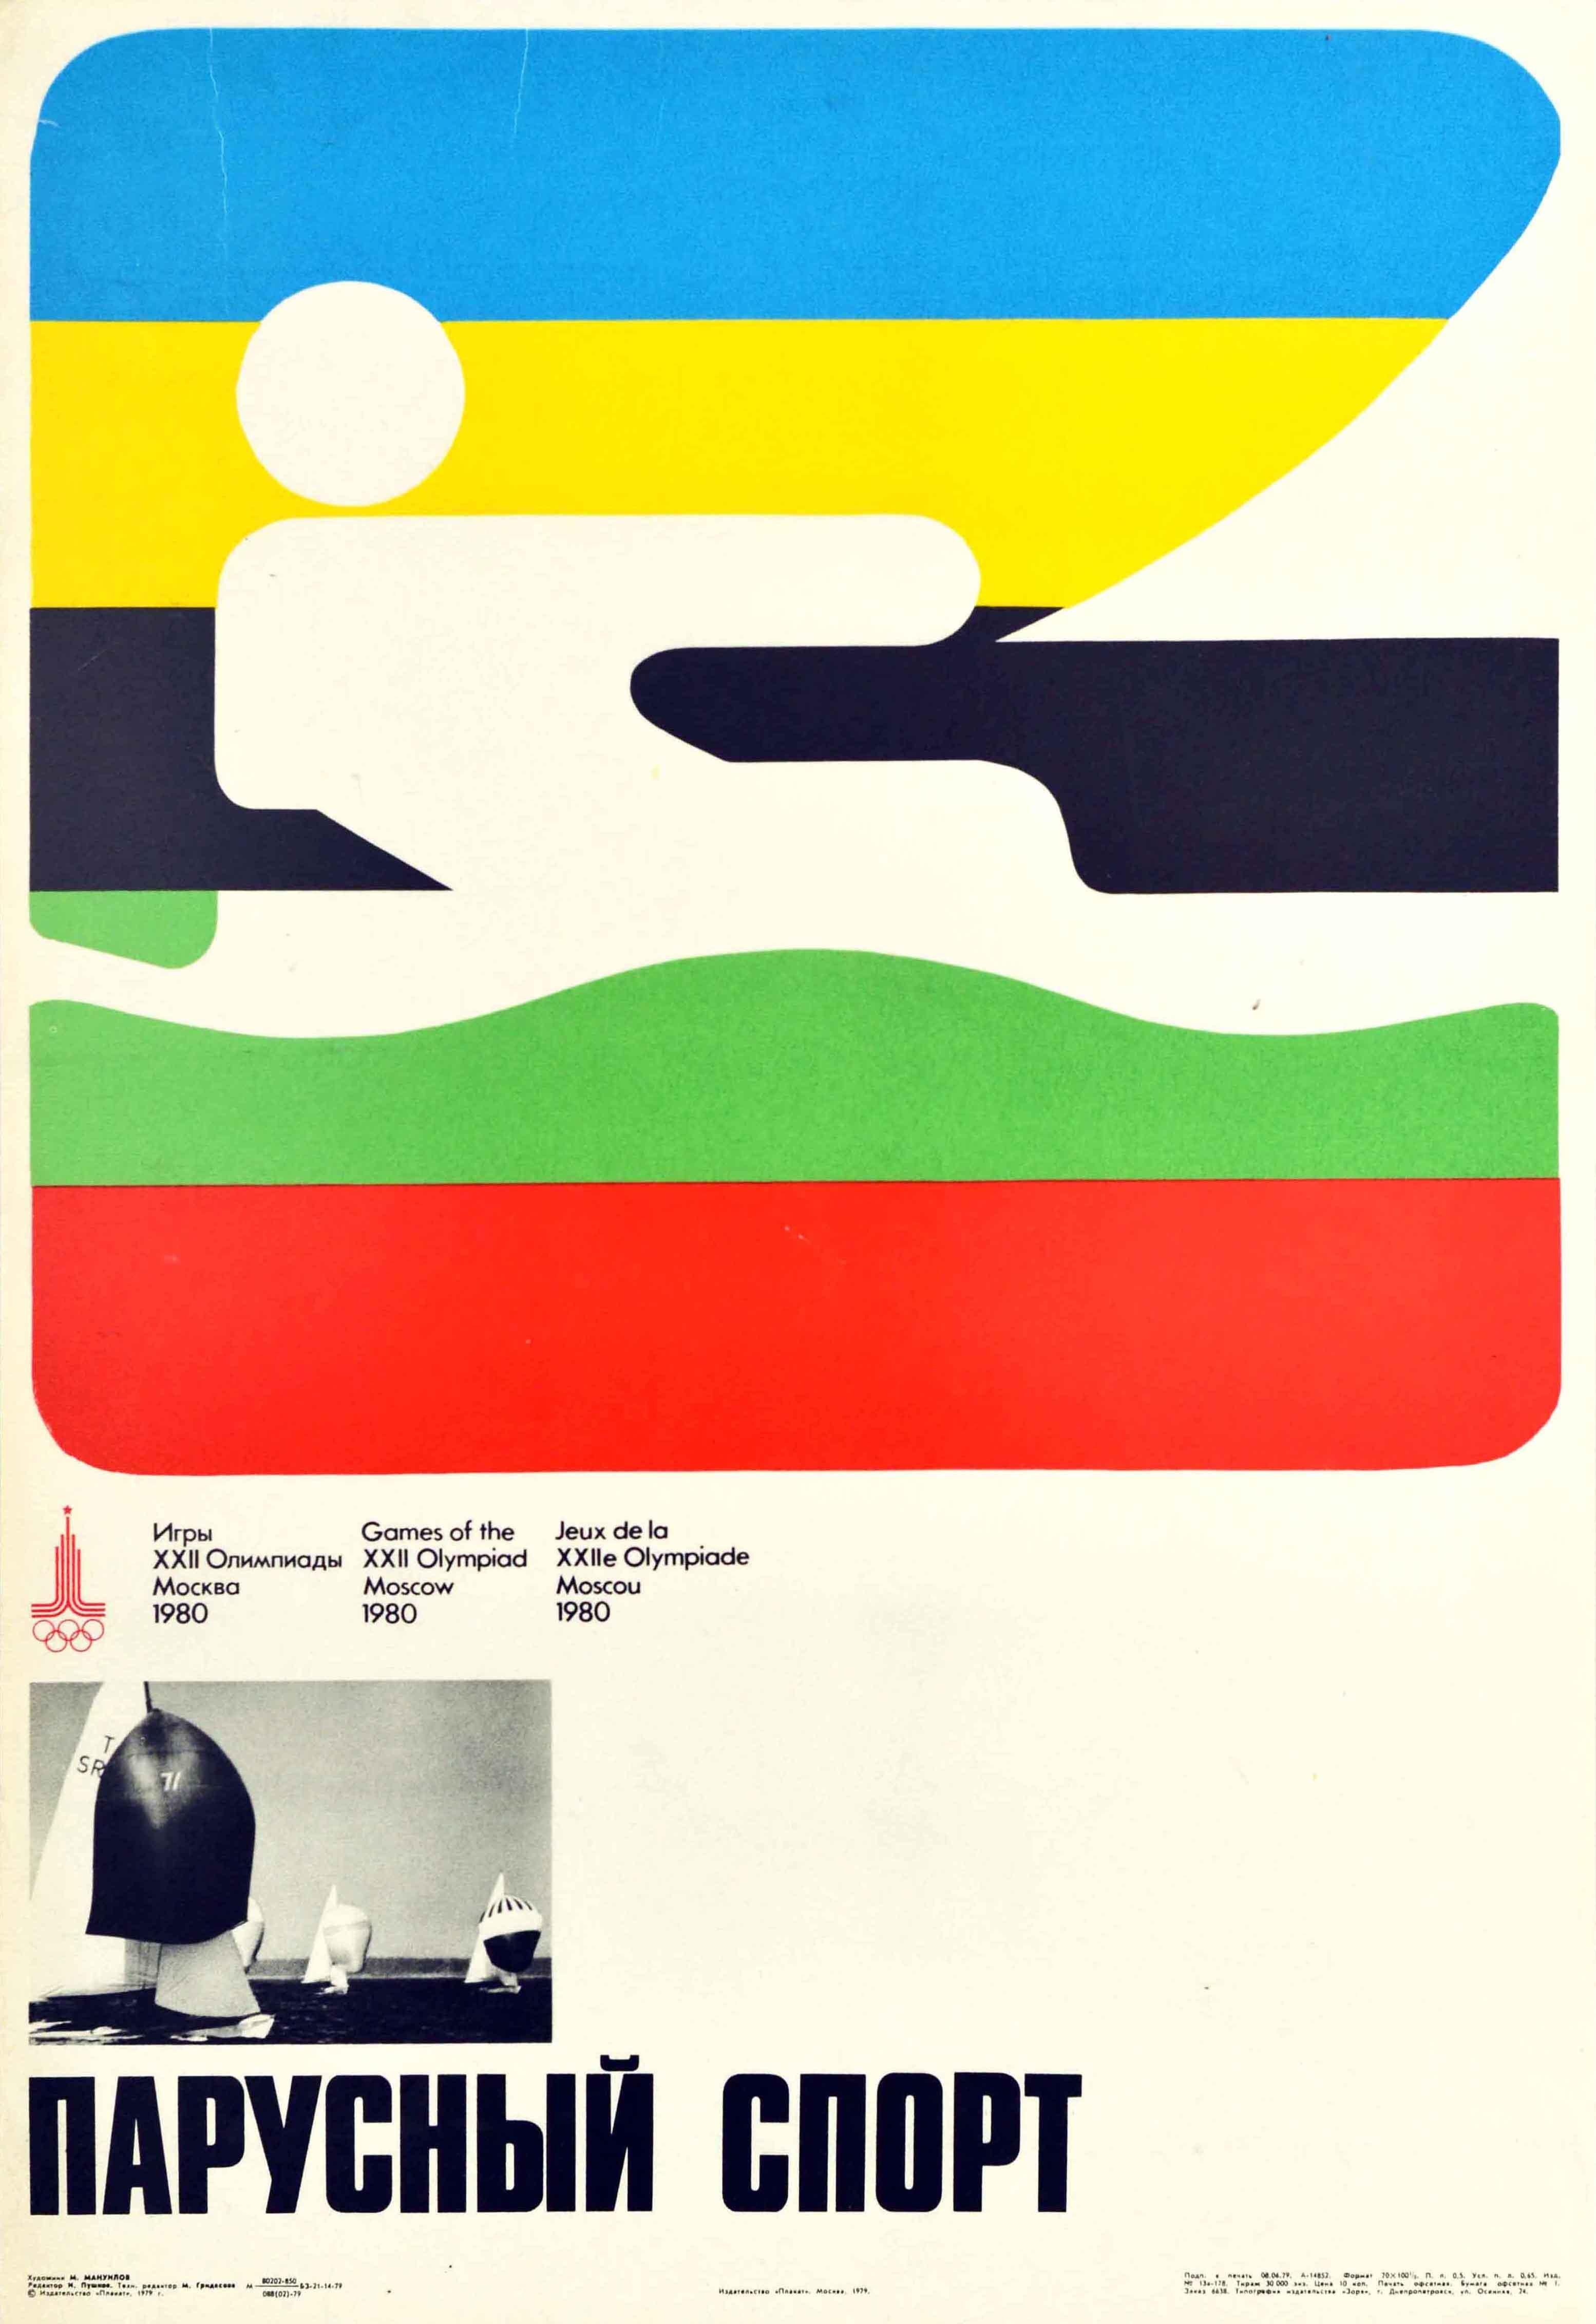 Original vintage sport poster for the Sailing event at the 22nd Summer Olympic Games / Games of the XXII Olympiad in 1980 held in Moscow Russia featuring a colourful pictogram design for Olympic sailing against a striped background of the five